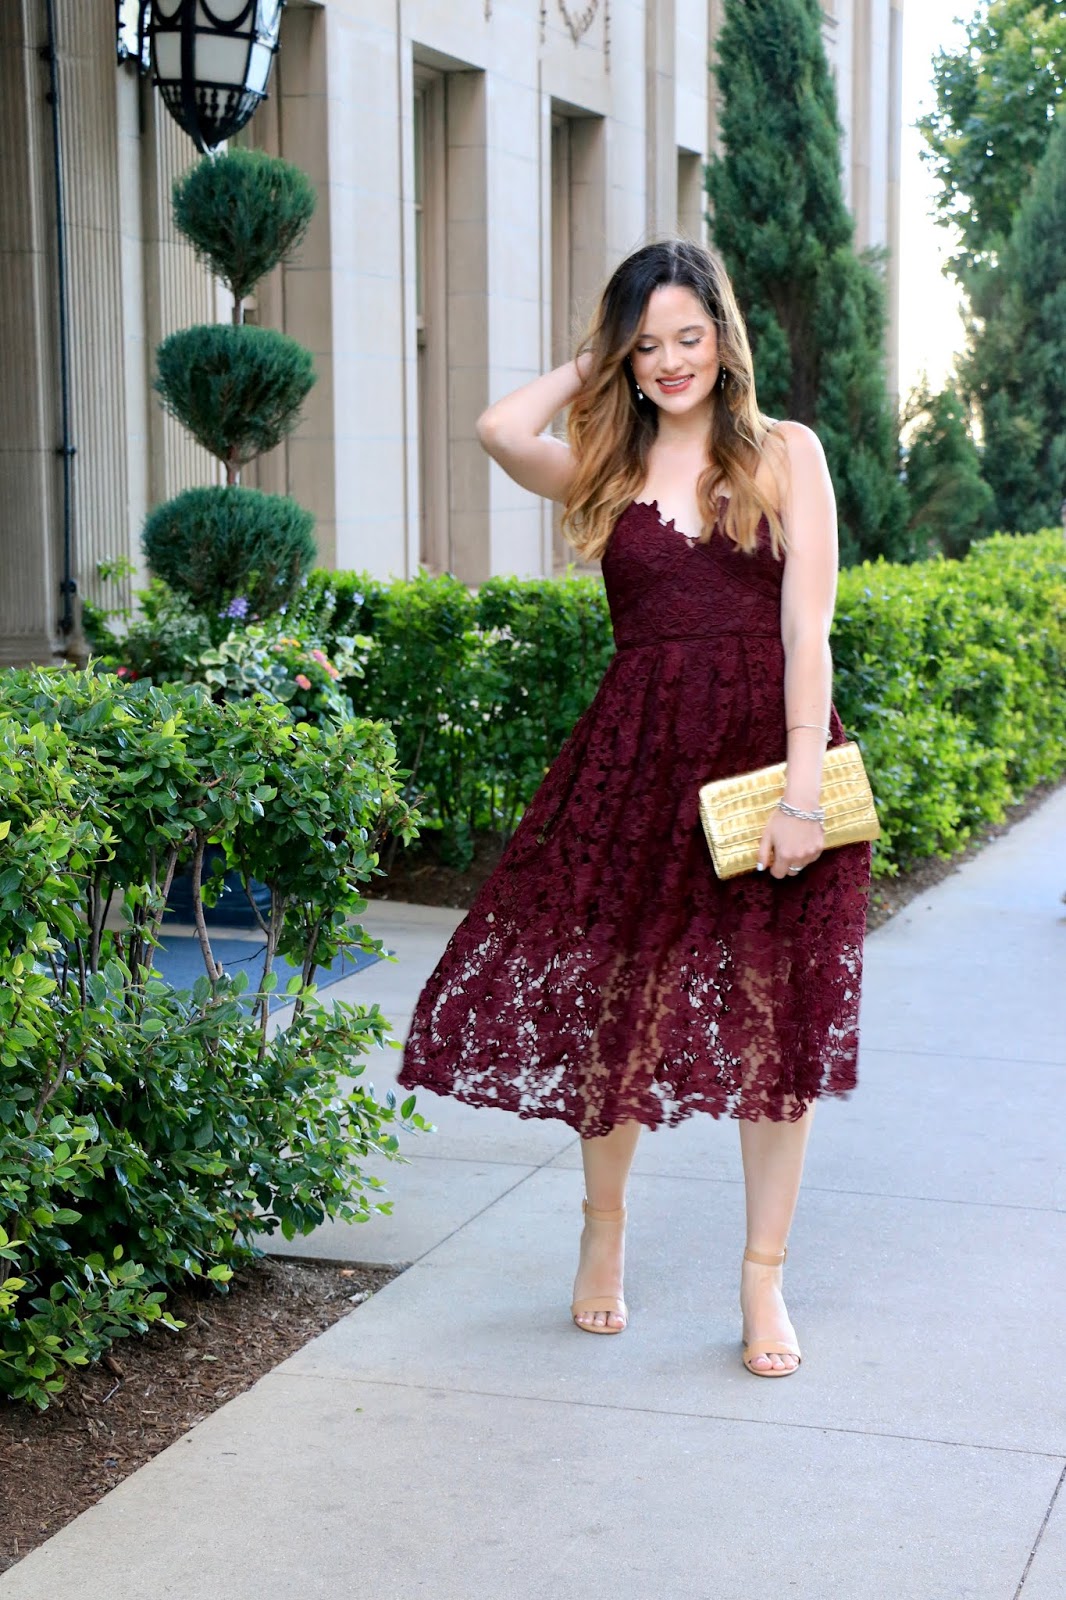 Nyc fashion blogger Kathleen Harper showing what to wear to a wedding